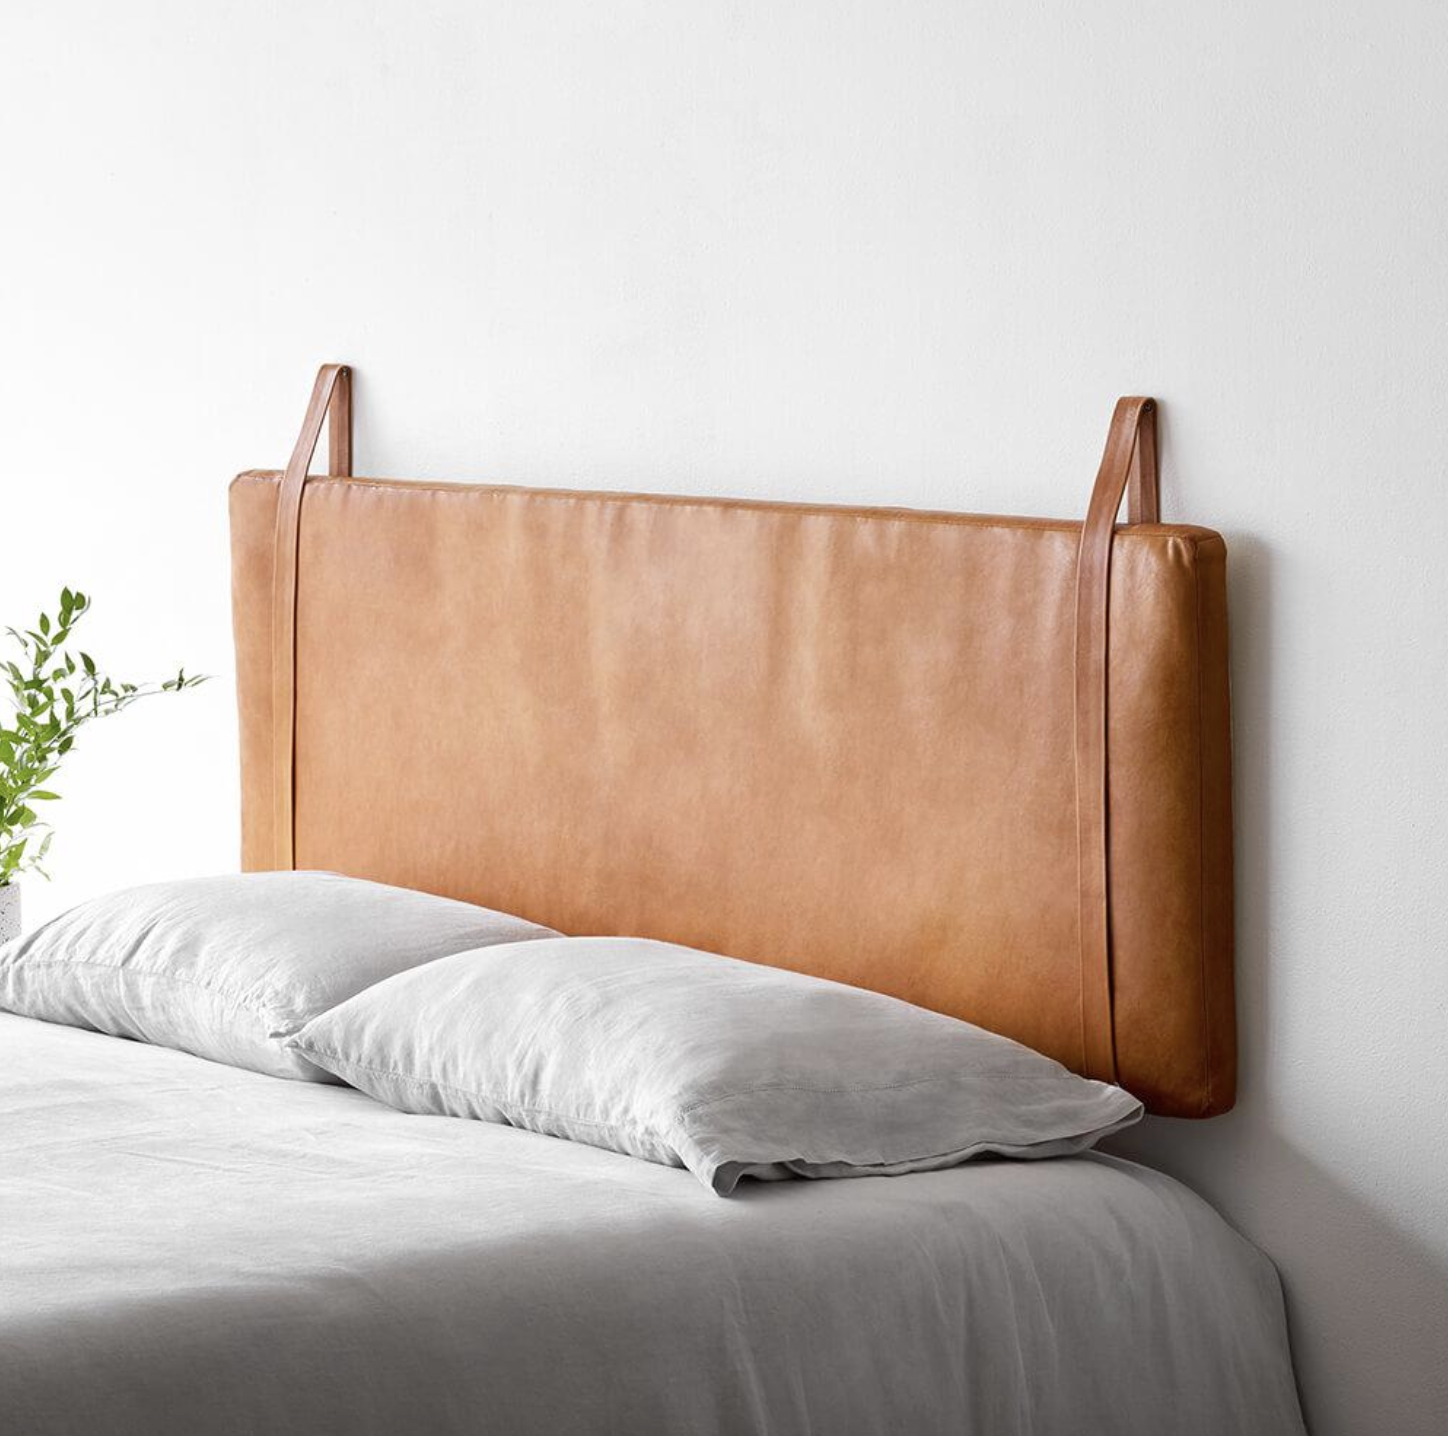 9 Wall Mounted Floating Headboards We, Best Way To Attach Headboard Wall Bed Frame